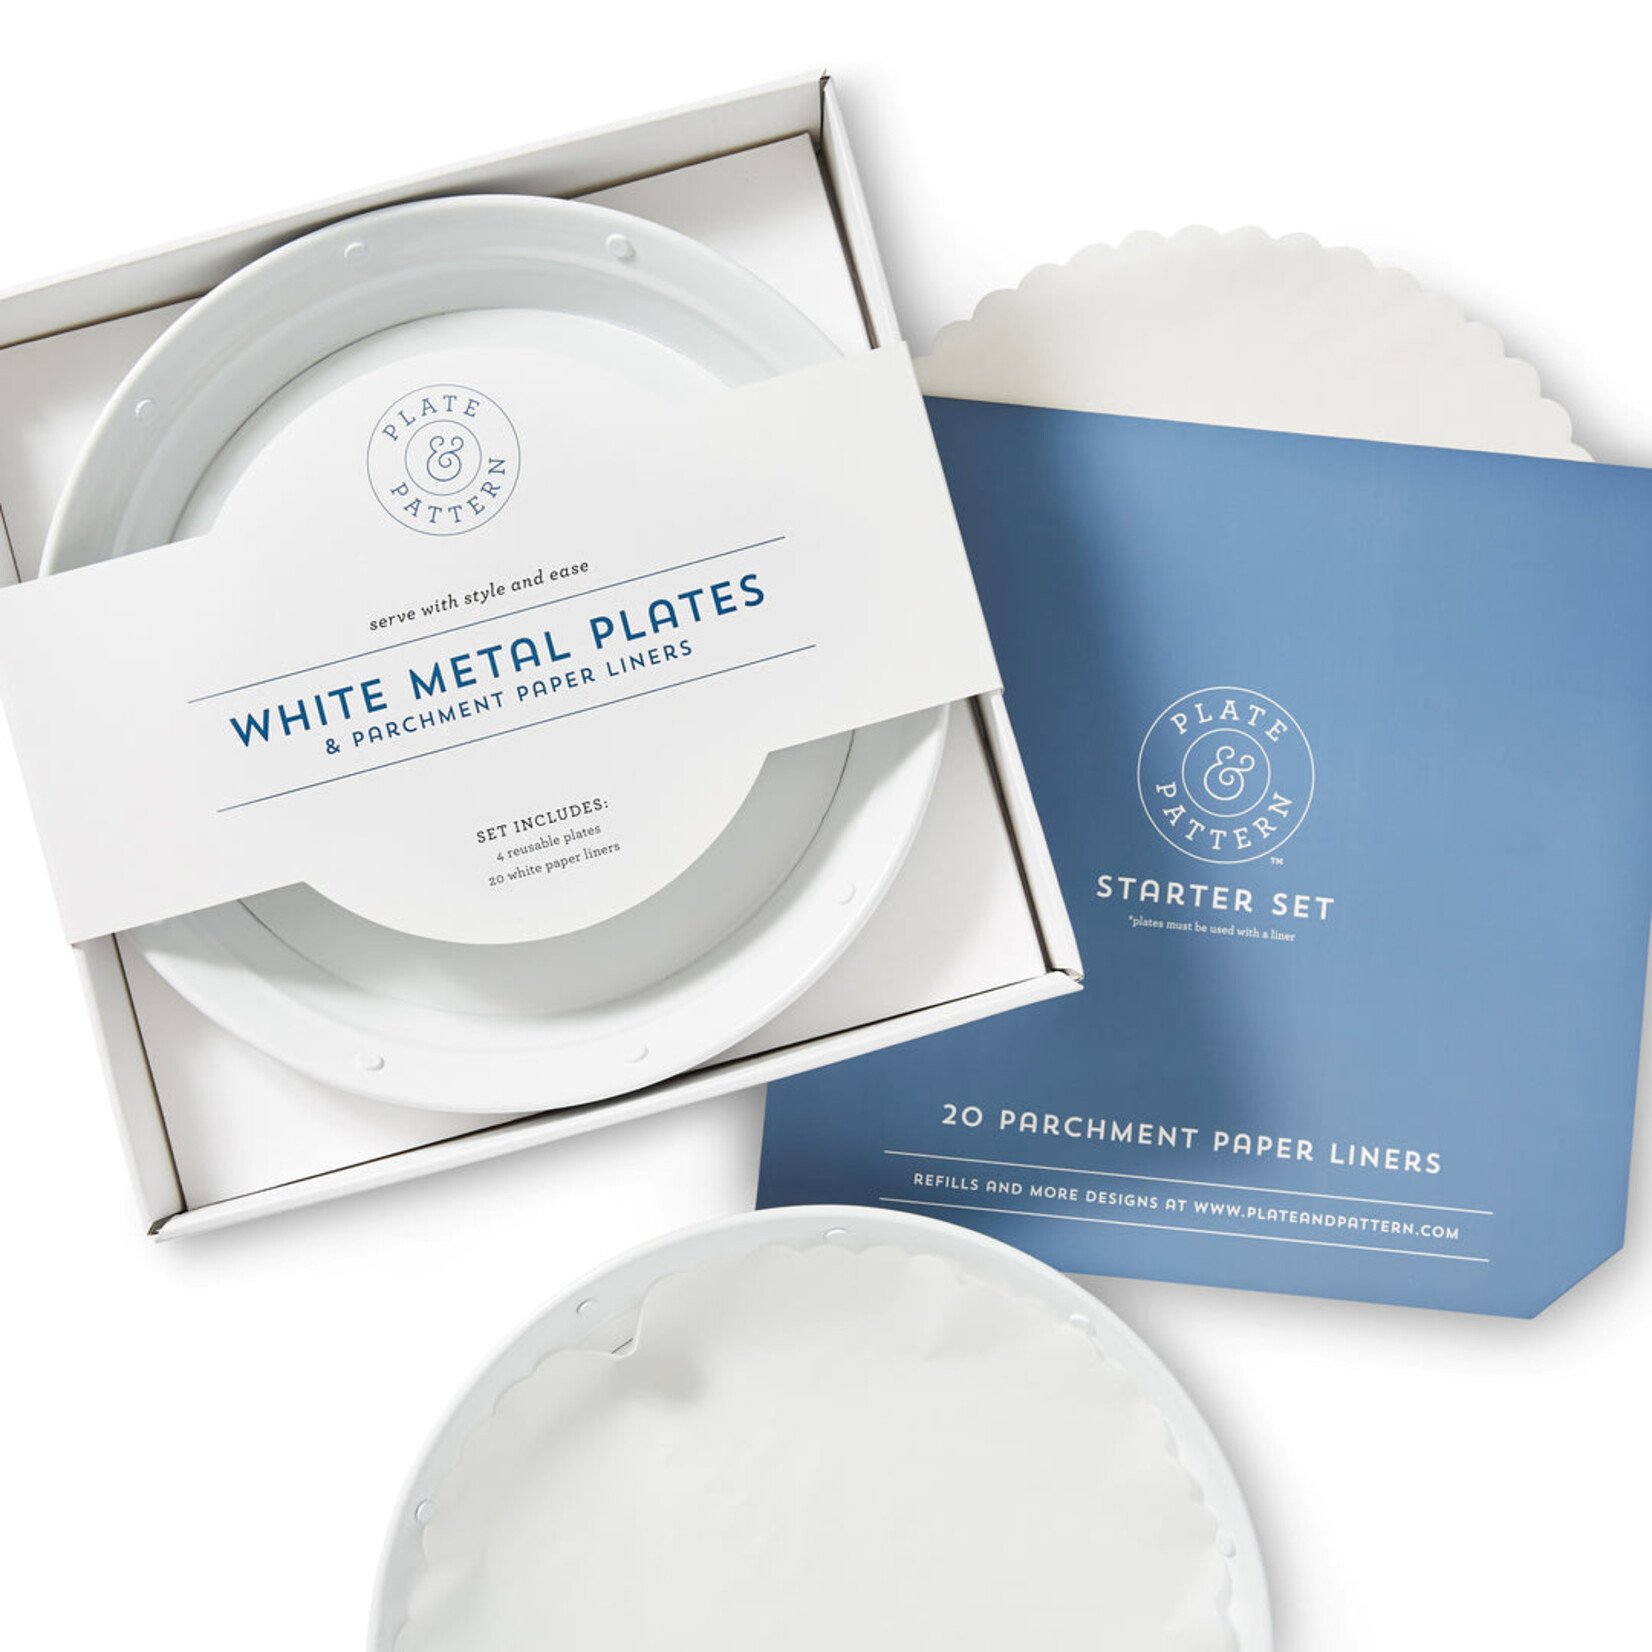 Plate & Pattern Plate & Parchment Dinnerware